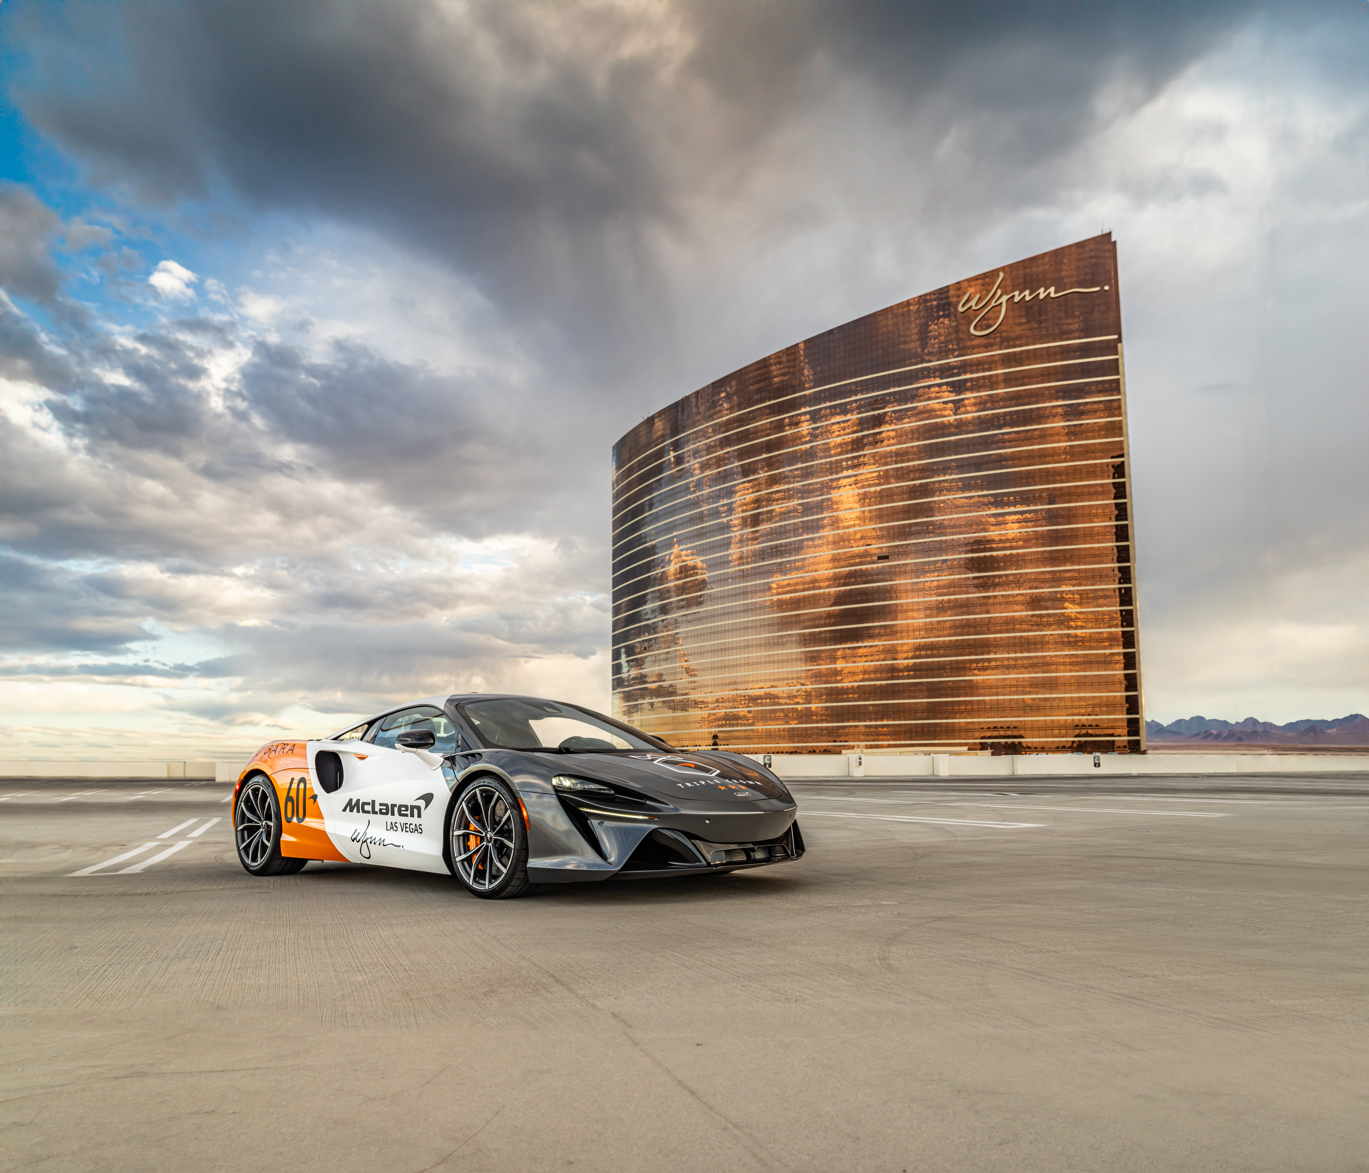 Dream Racing - Las Vegas Driving Experience - Worlds Largest